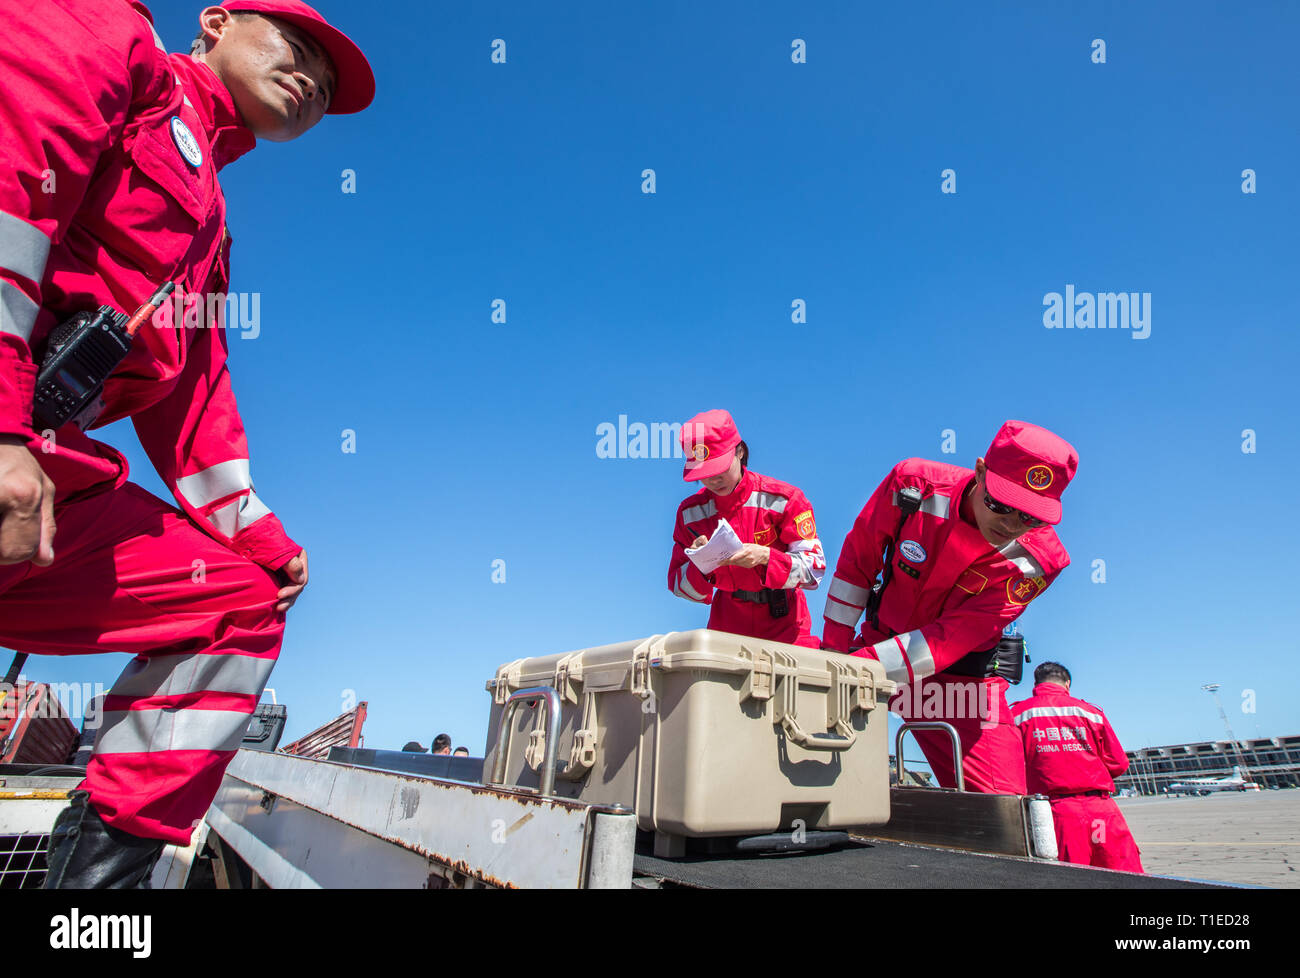 Beijing, Mozambique. 25th Mar, 2019. Chinese rescue team members transfer the newly-arrived equipment and materials at Beira International Airport in Beira, Mozambique, on March 25, 2019. A Chinese rescue team comprised of 65 members arrived at Beira International Airport in Mozambique on Monday after Cyclone Idai wreaked havoc in the southeast African country. Credit: Zhang Yu/Xinhua/Alamy Live News Stock Photo